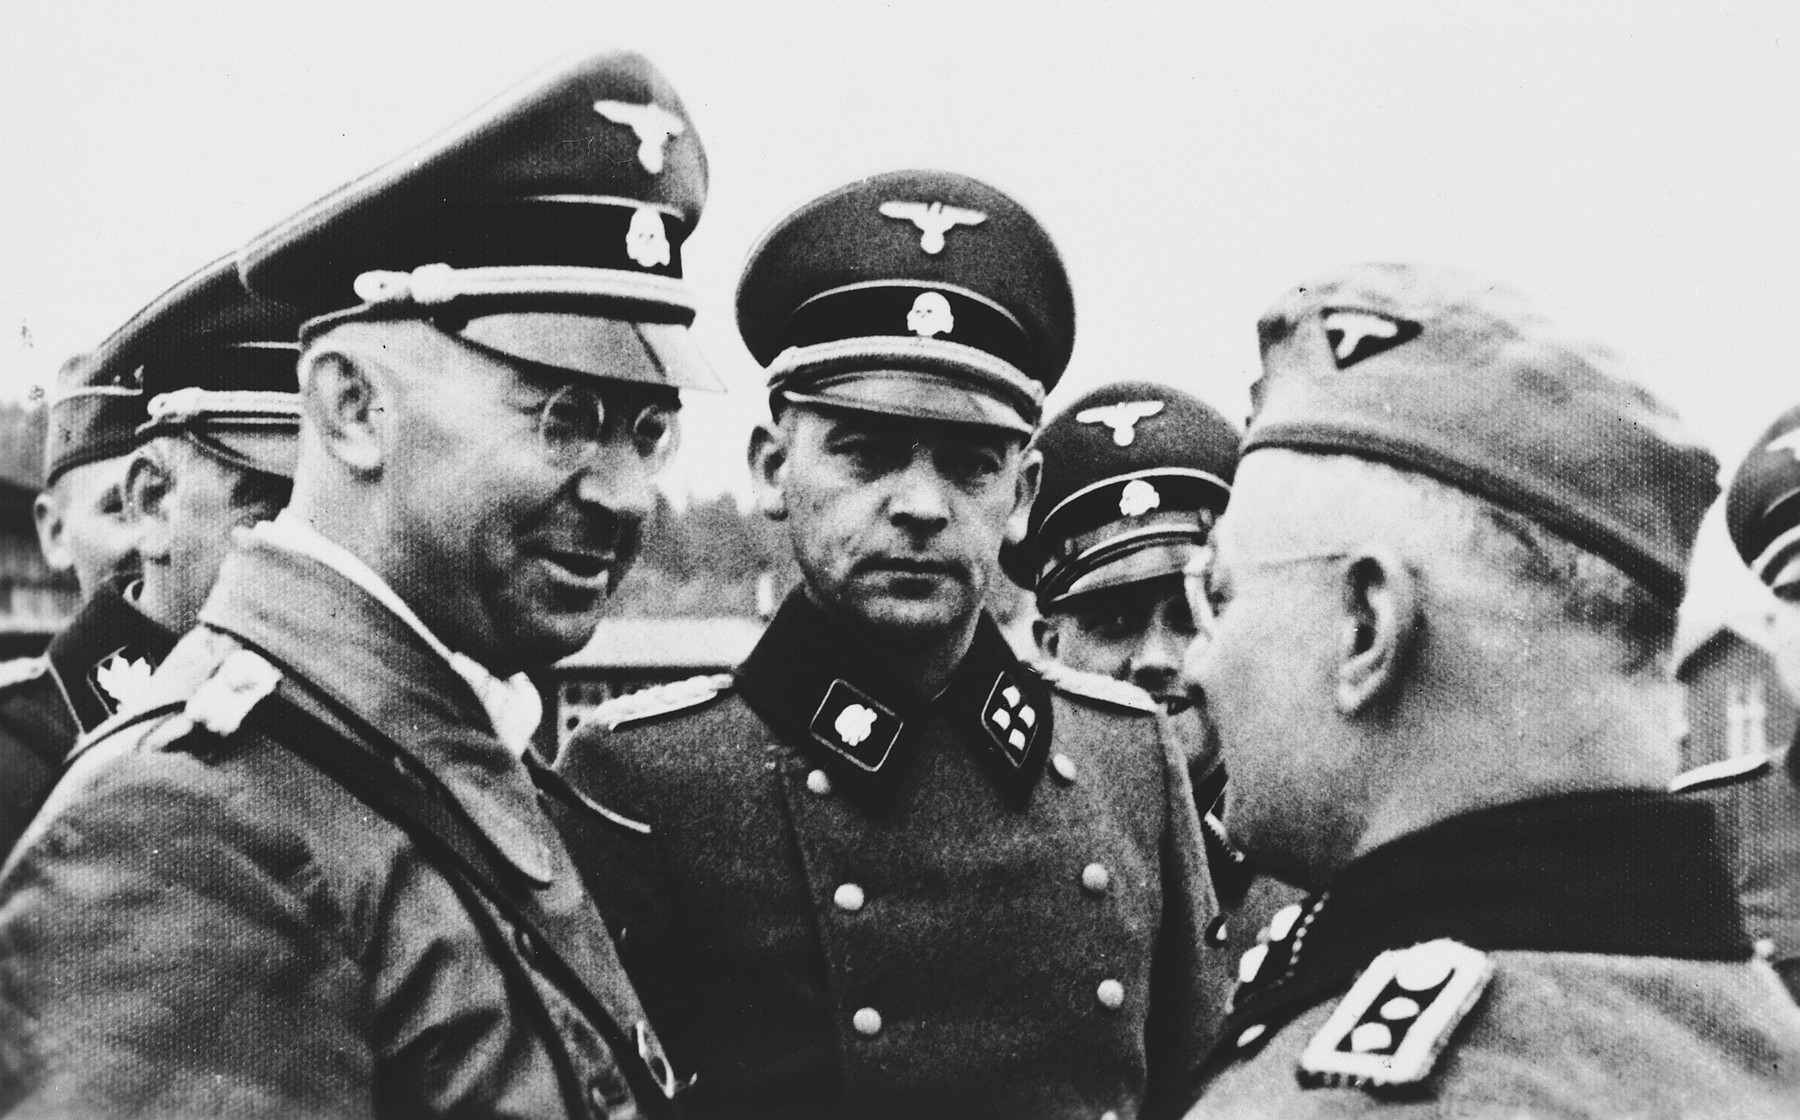 Heinrich Himmler confers with SS officers while visiting the Flossenbuerg concentration camp.

Heinrich Himmler is pictured on the left.  To his right the camp commandant Karl Künstler, to the his right in the back the adjutant Ludwig Baumgartner.